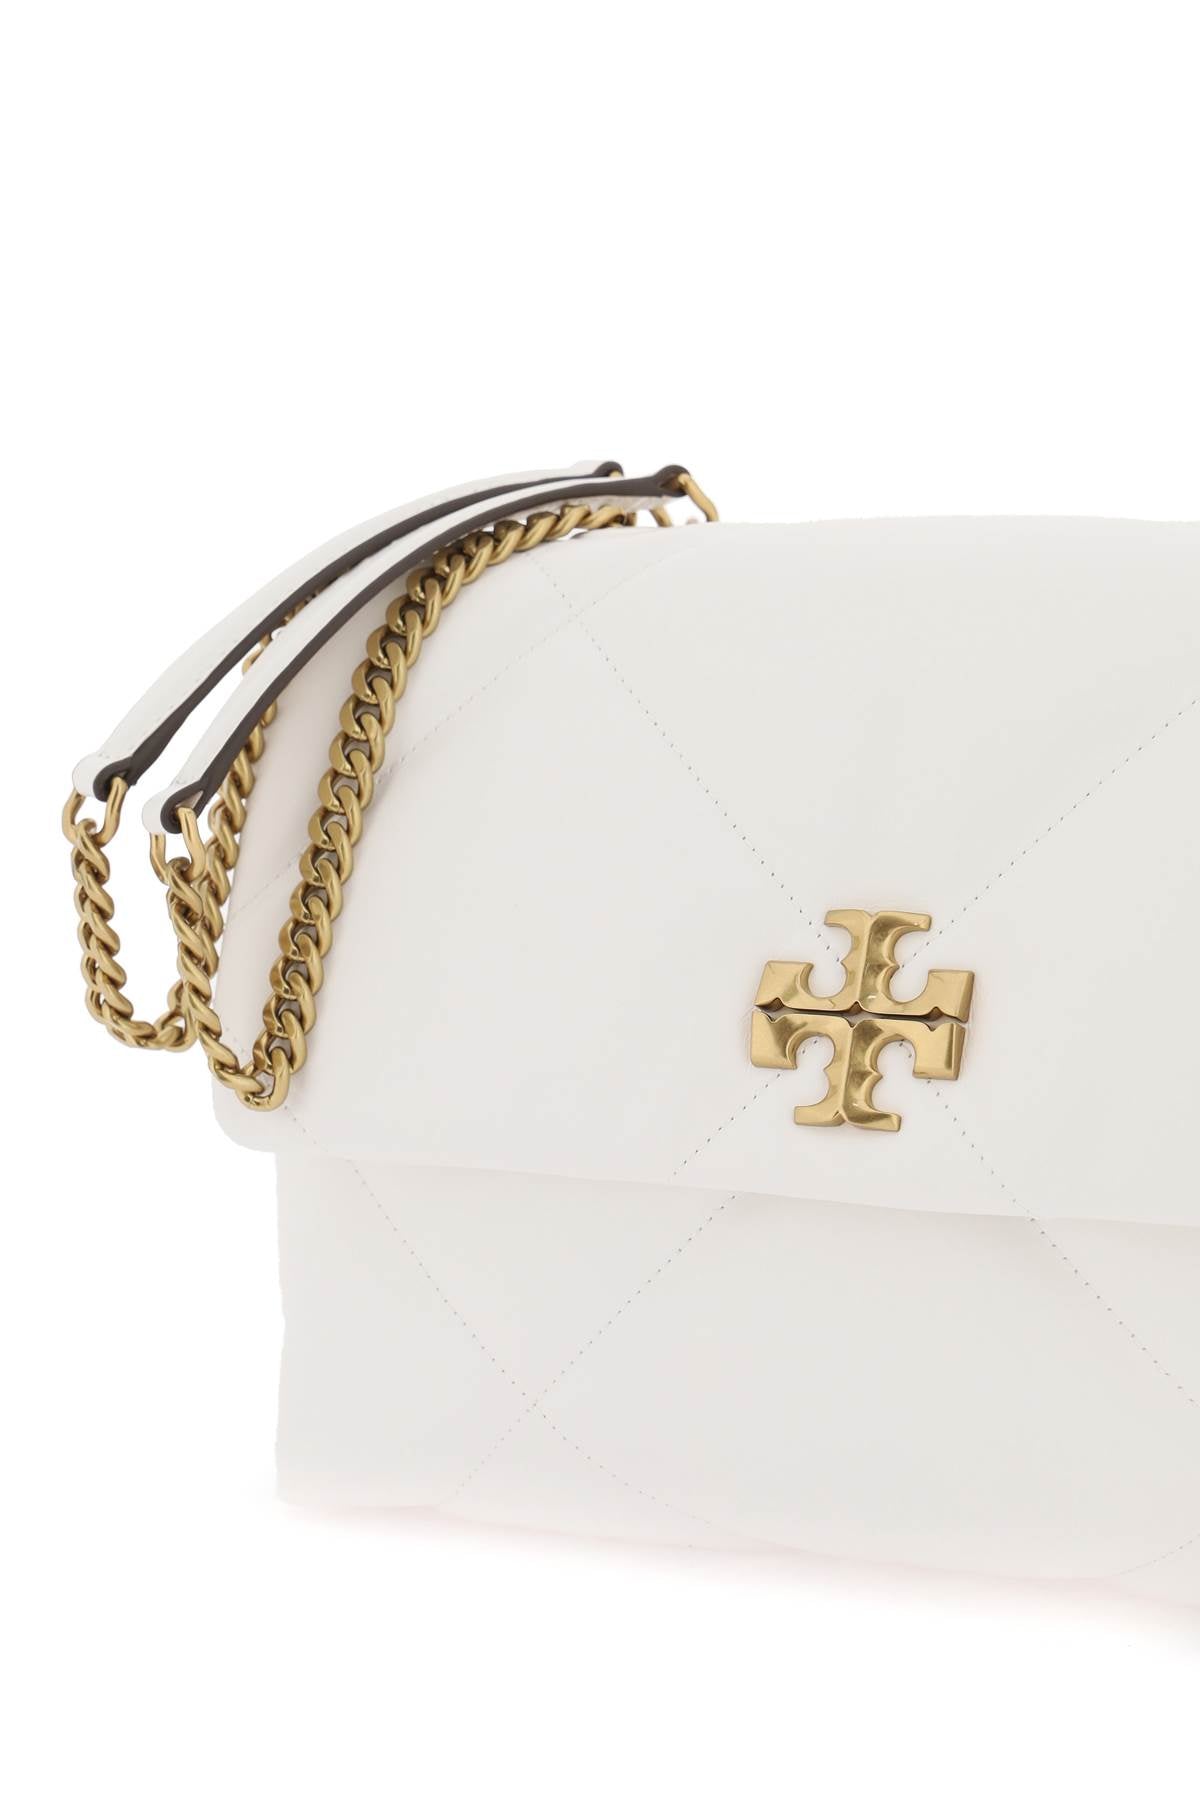 TORY BURCH Quilted Nappa Leather Shoulder Handbag for Women - White